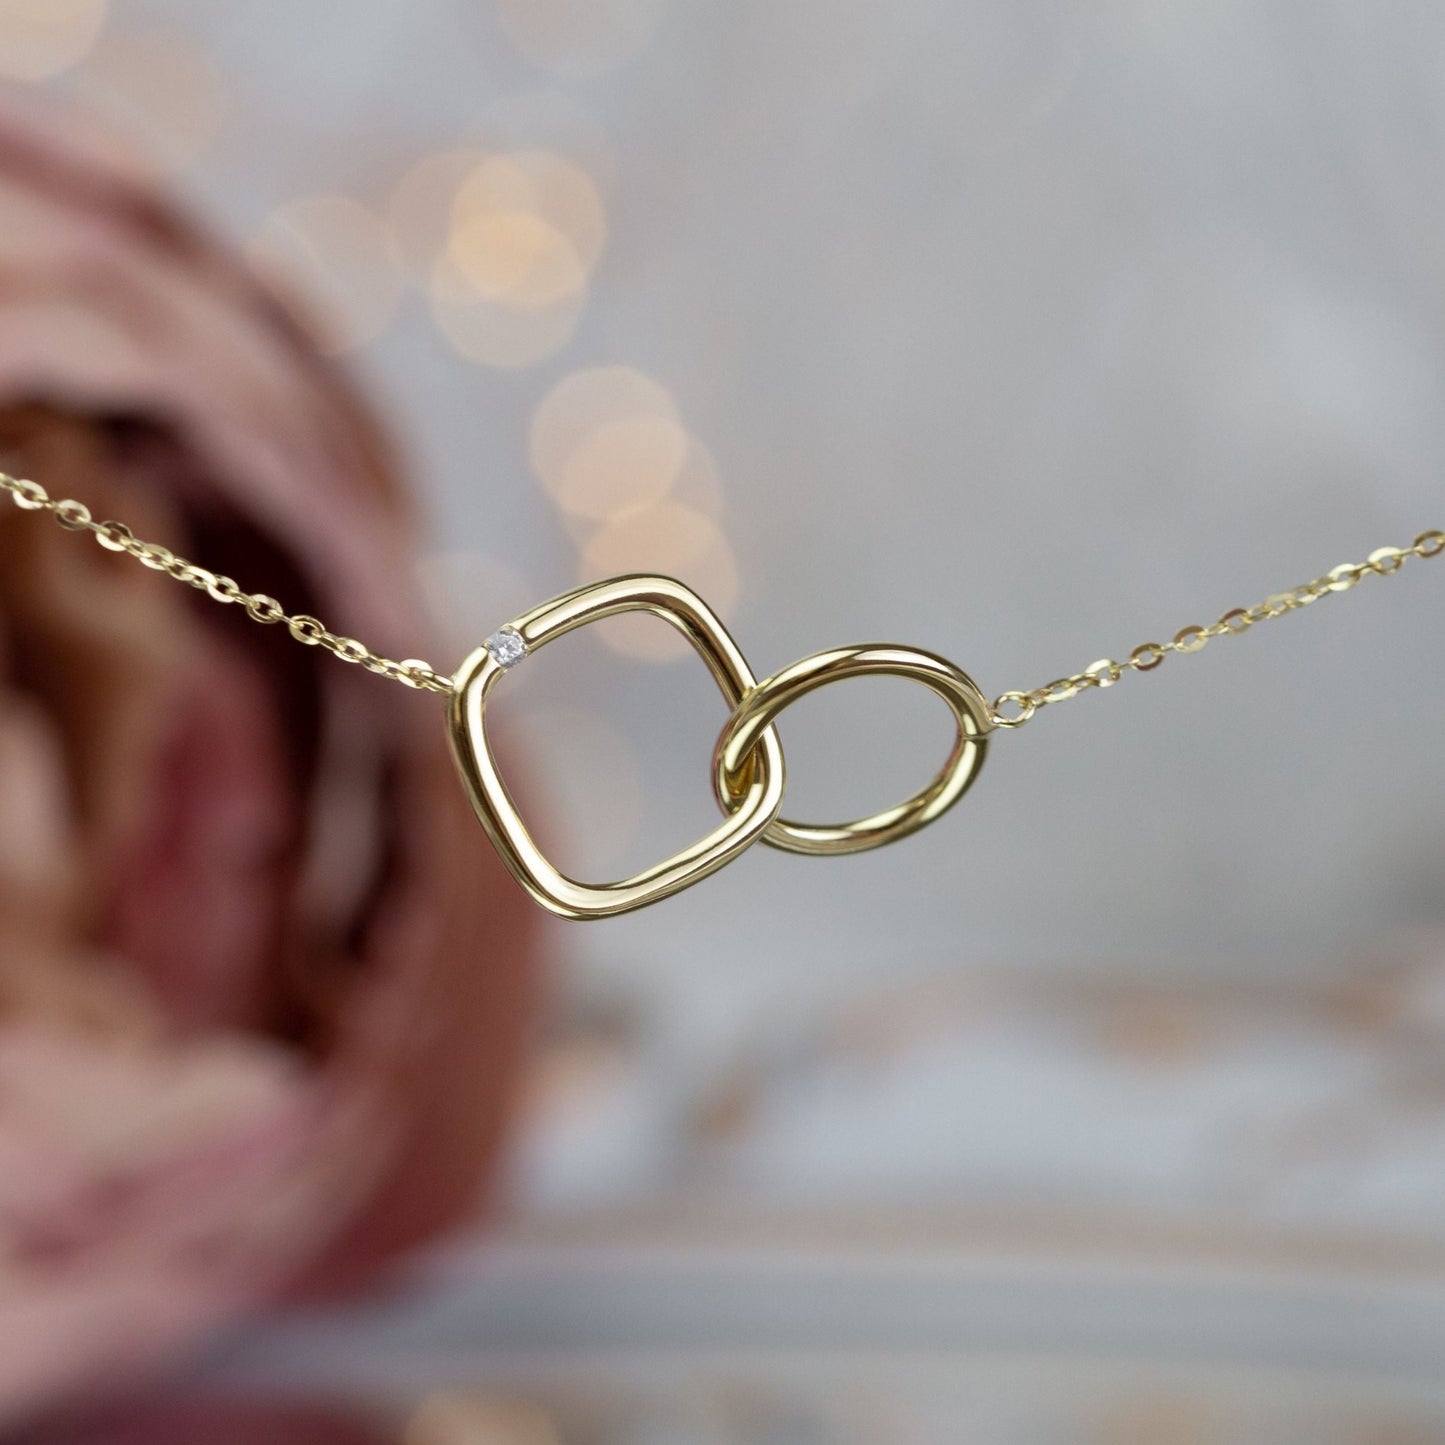 Infinity Rings Necklace